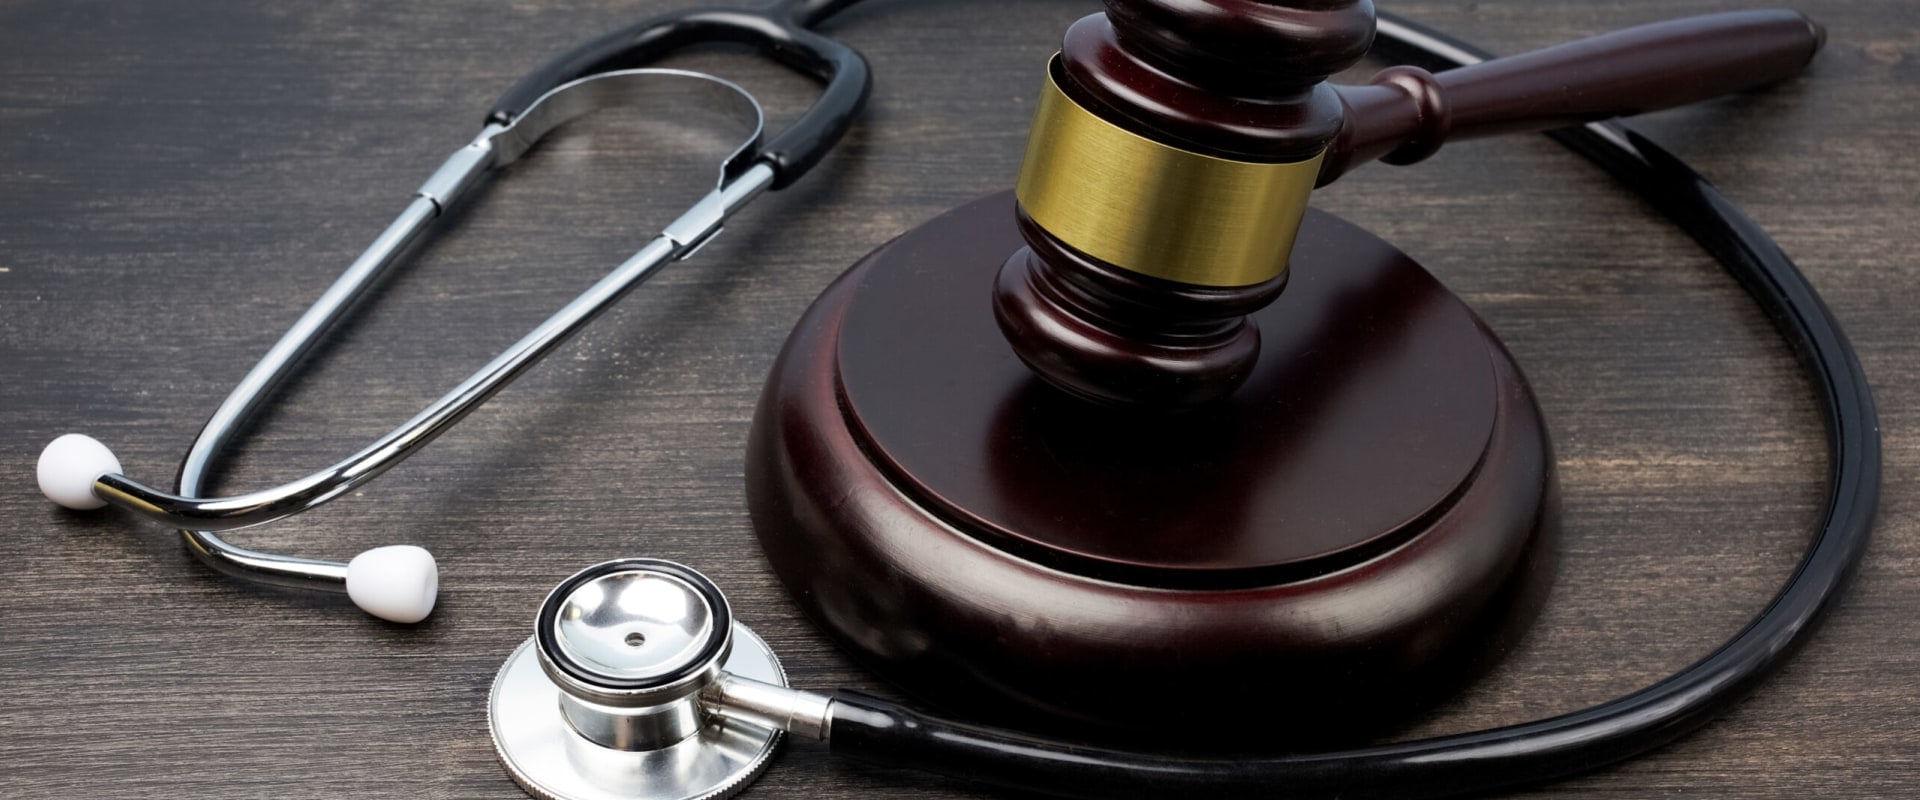 What are the 4 elements of malpractice in nursing?